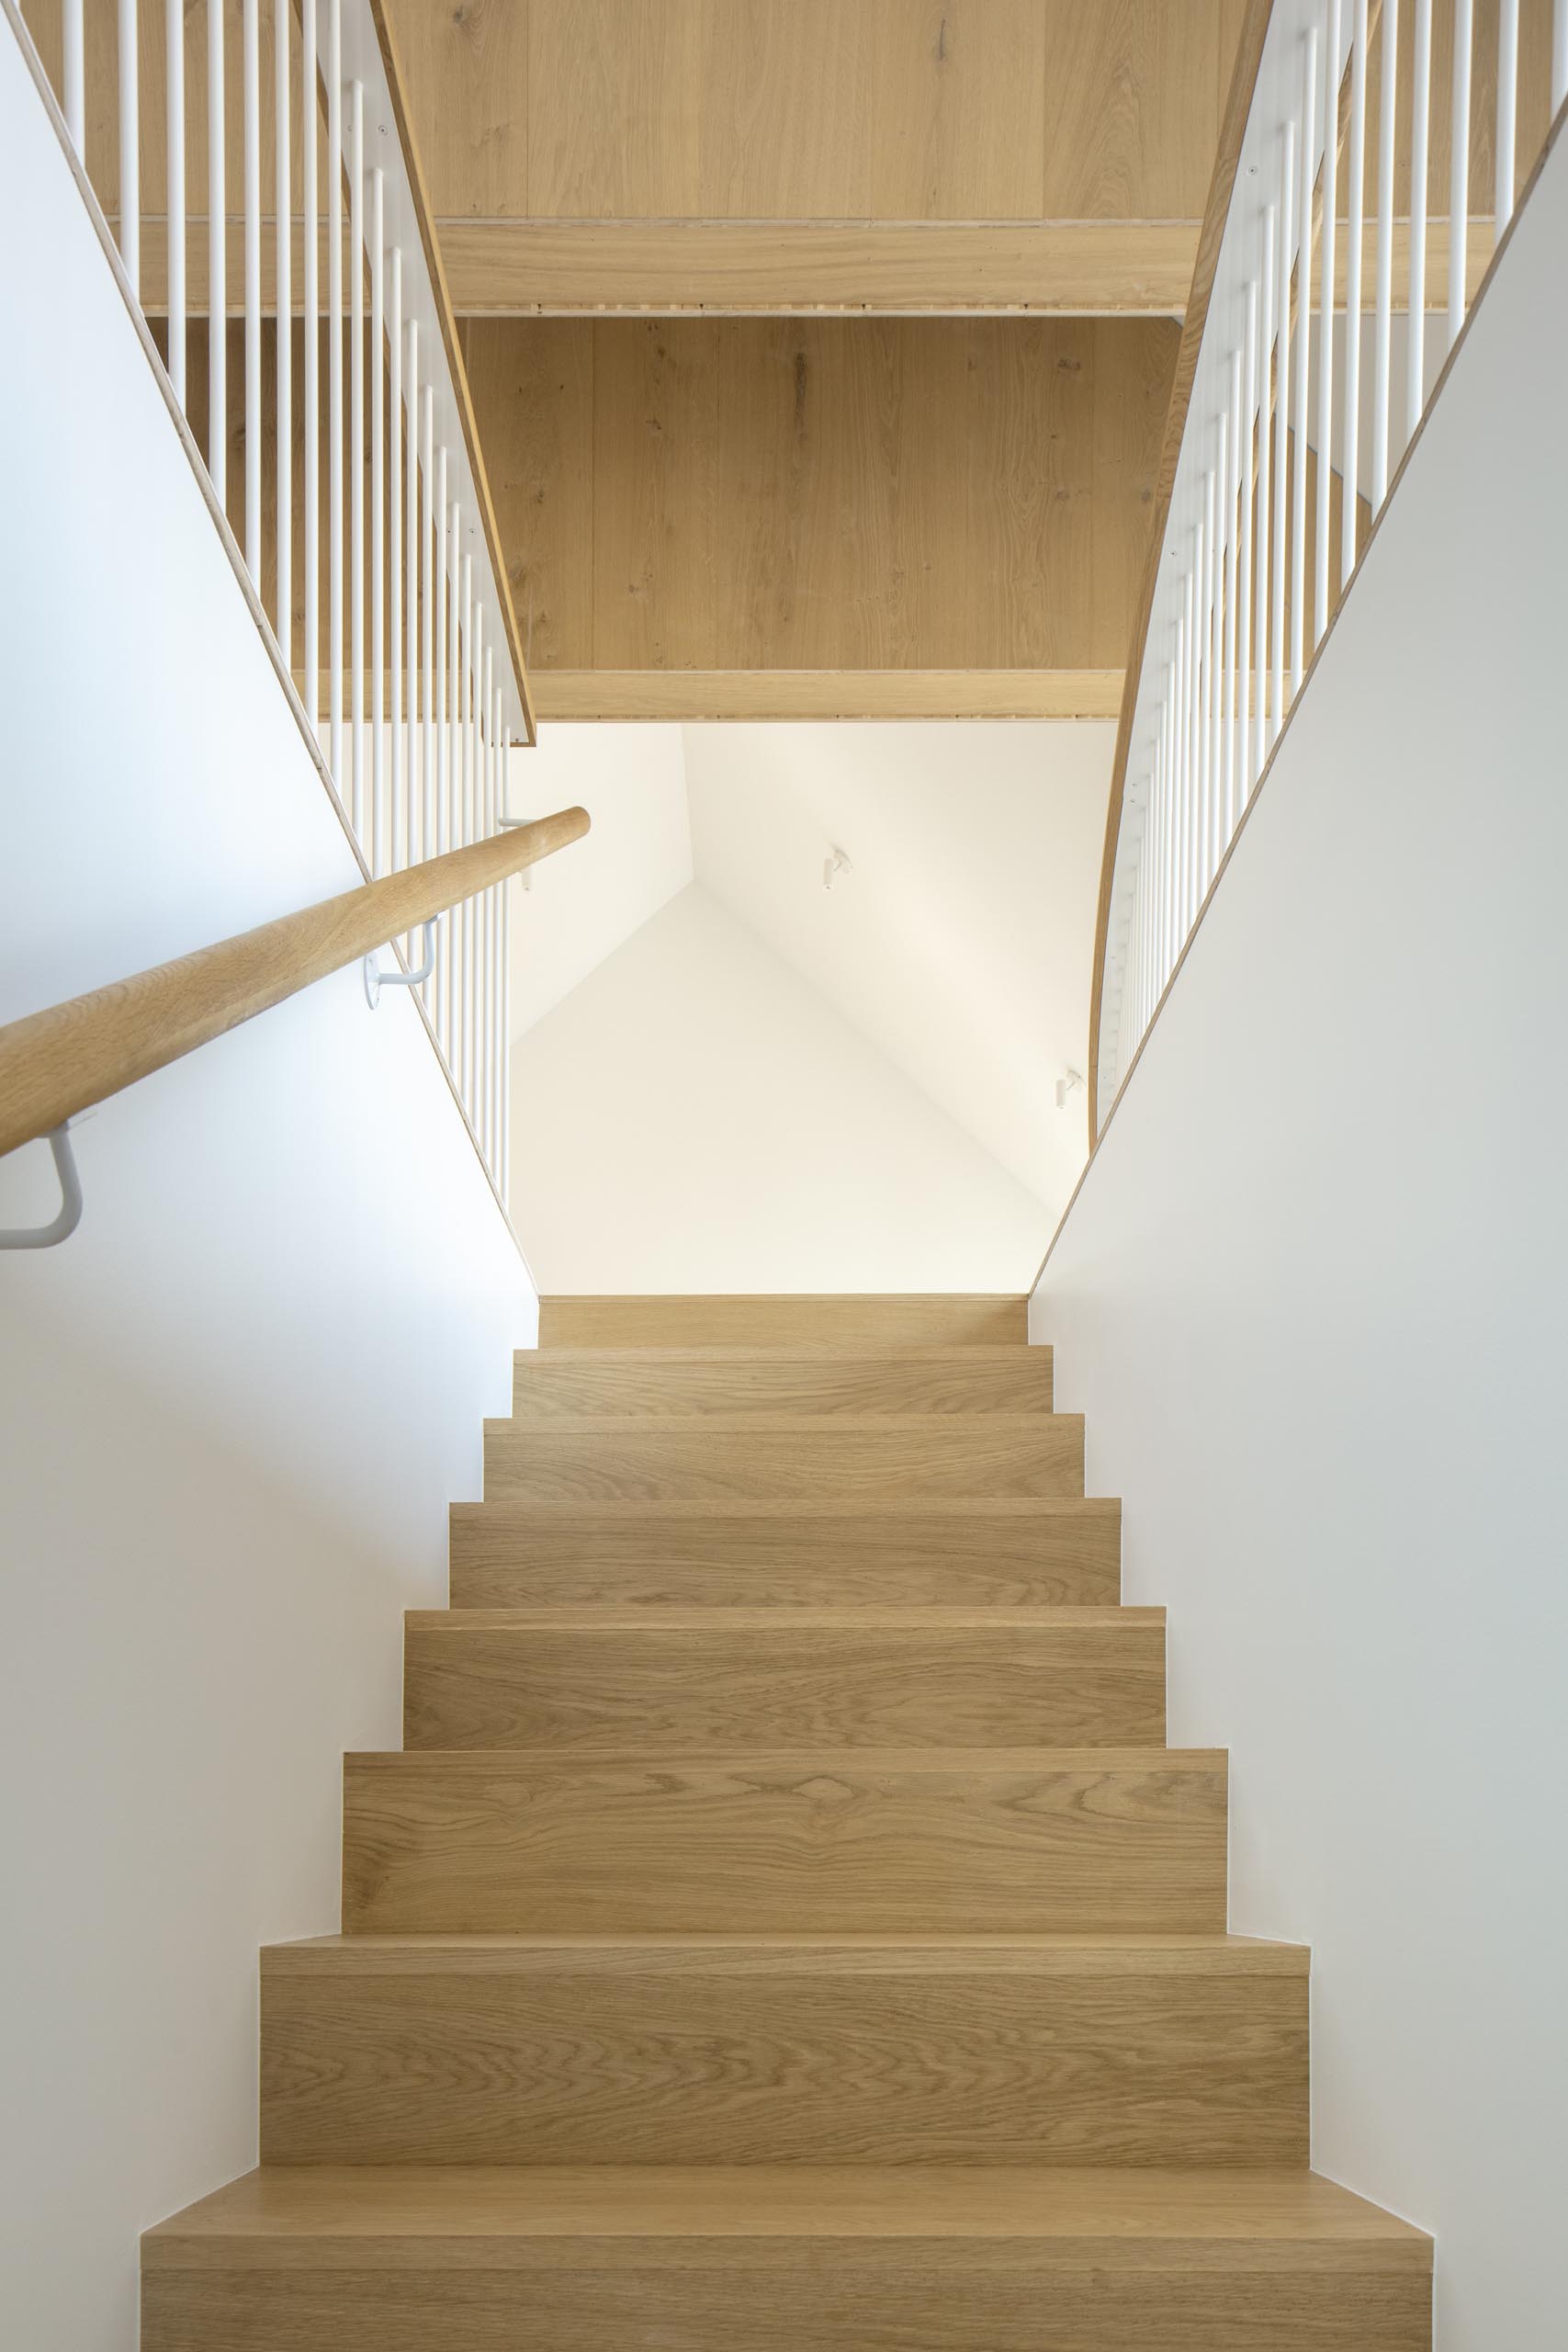 Wood stairs with a matching handrail lead up to the social areas of this modern home.